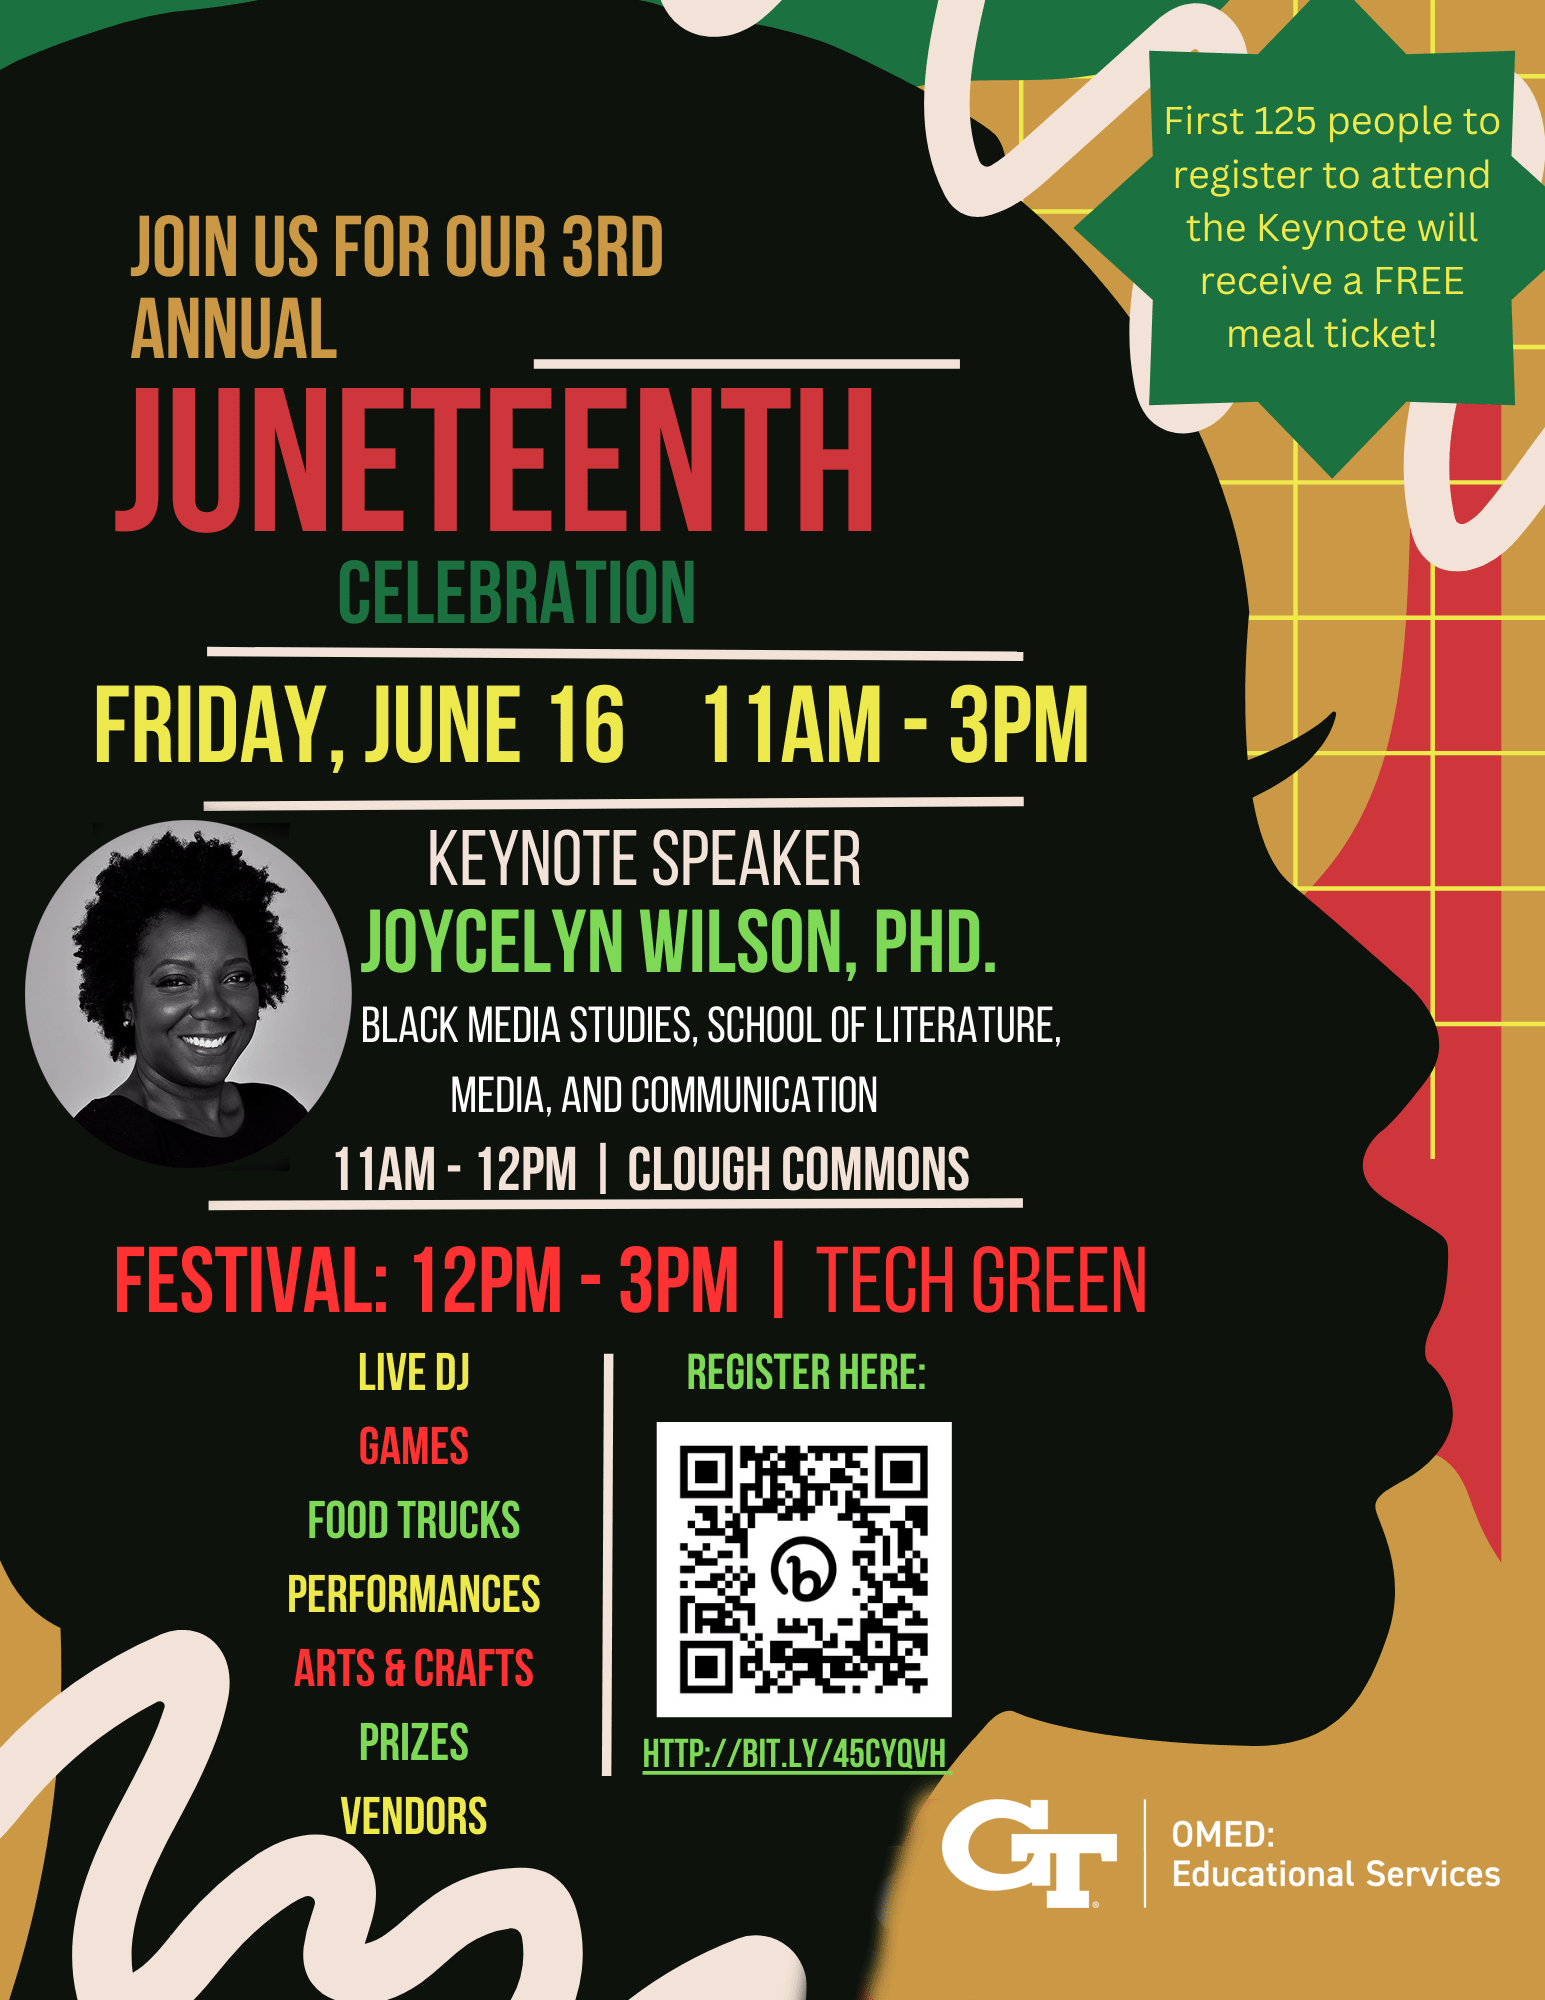 Join us for the 3rd annual Georgia Tech Juneteenth Celebration on Friday, June 16, featuring a keynote address from Joycelyn Wilson, Ph.D. at the Clough Commons and a festival at Tech Green with live music, food, and games.

Register at&nbsp;bit.ly/45CYQVH.
